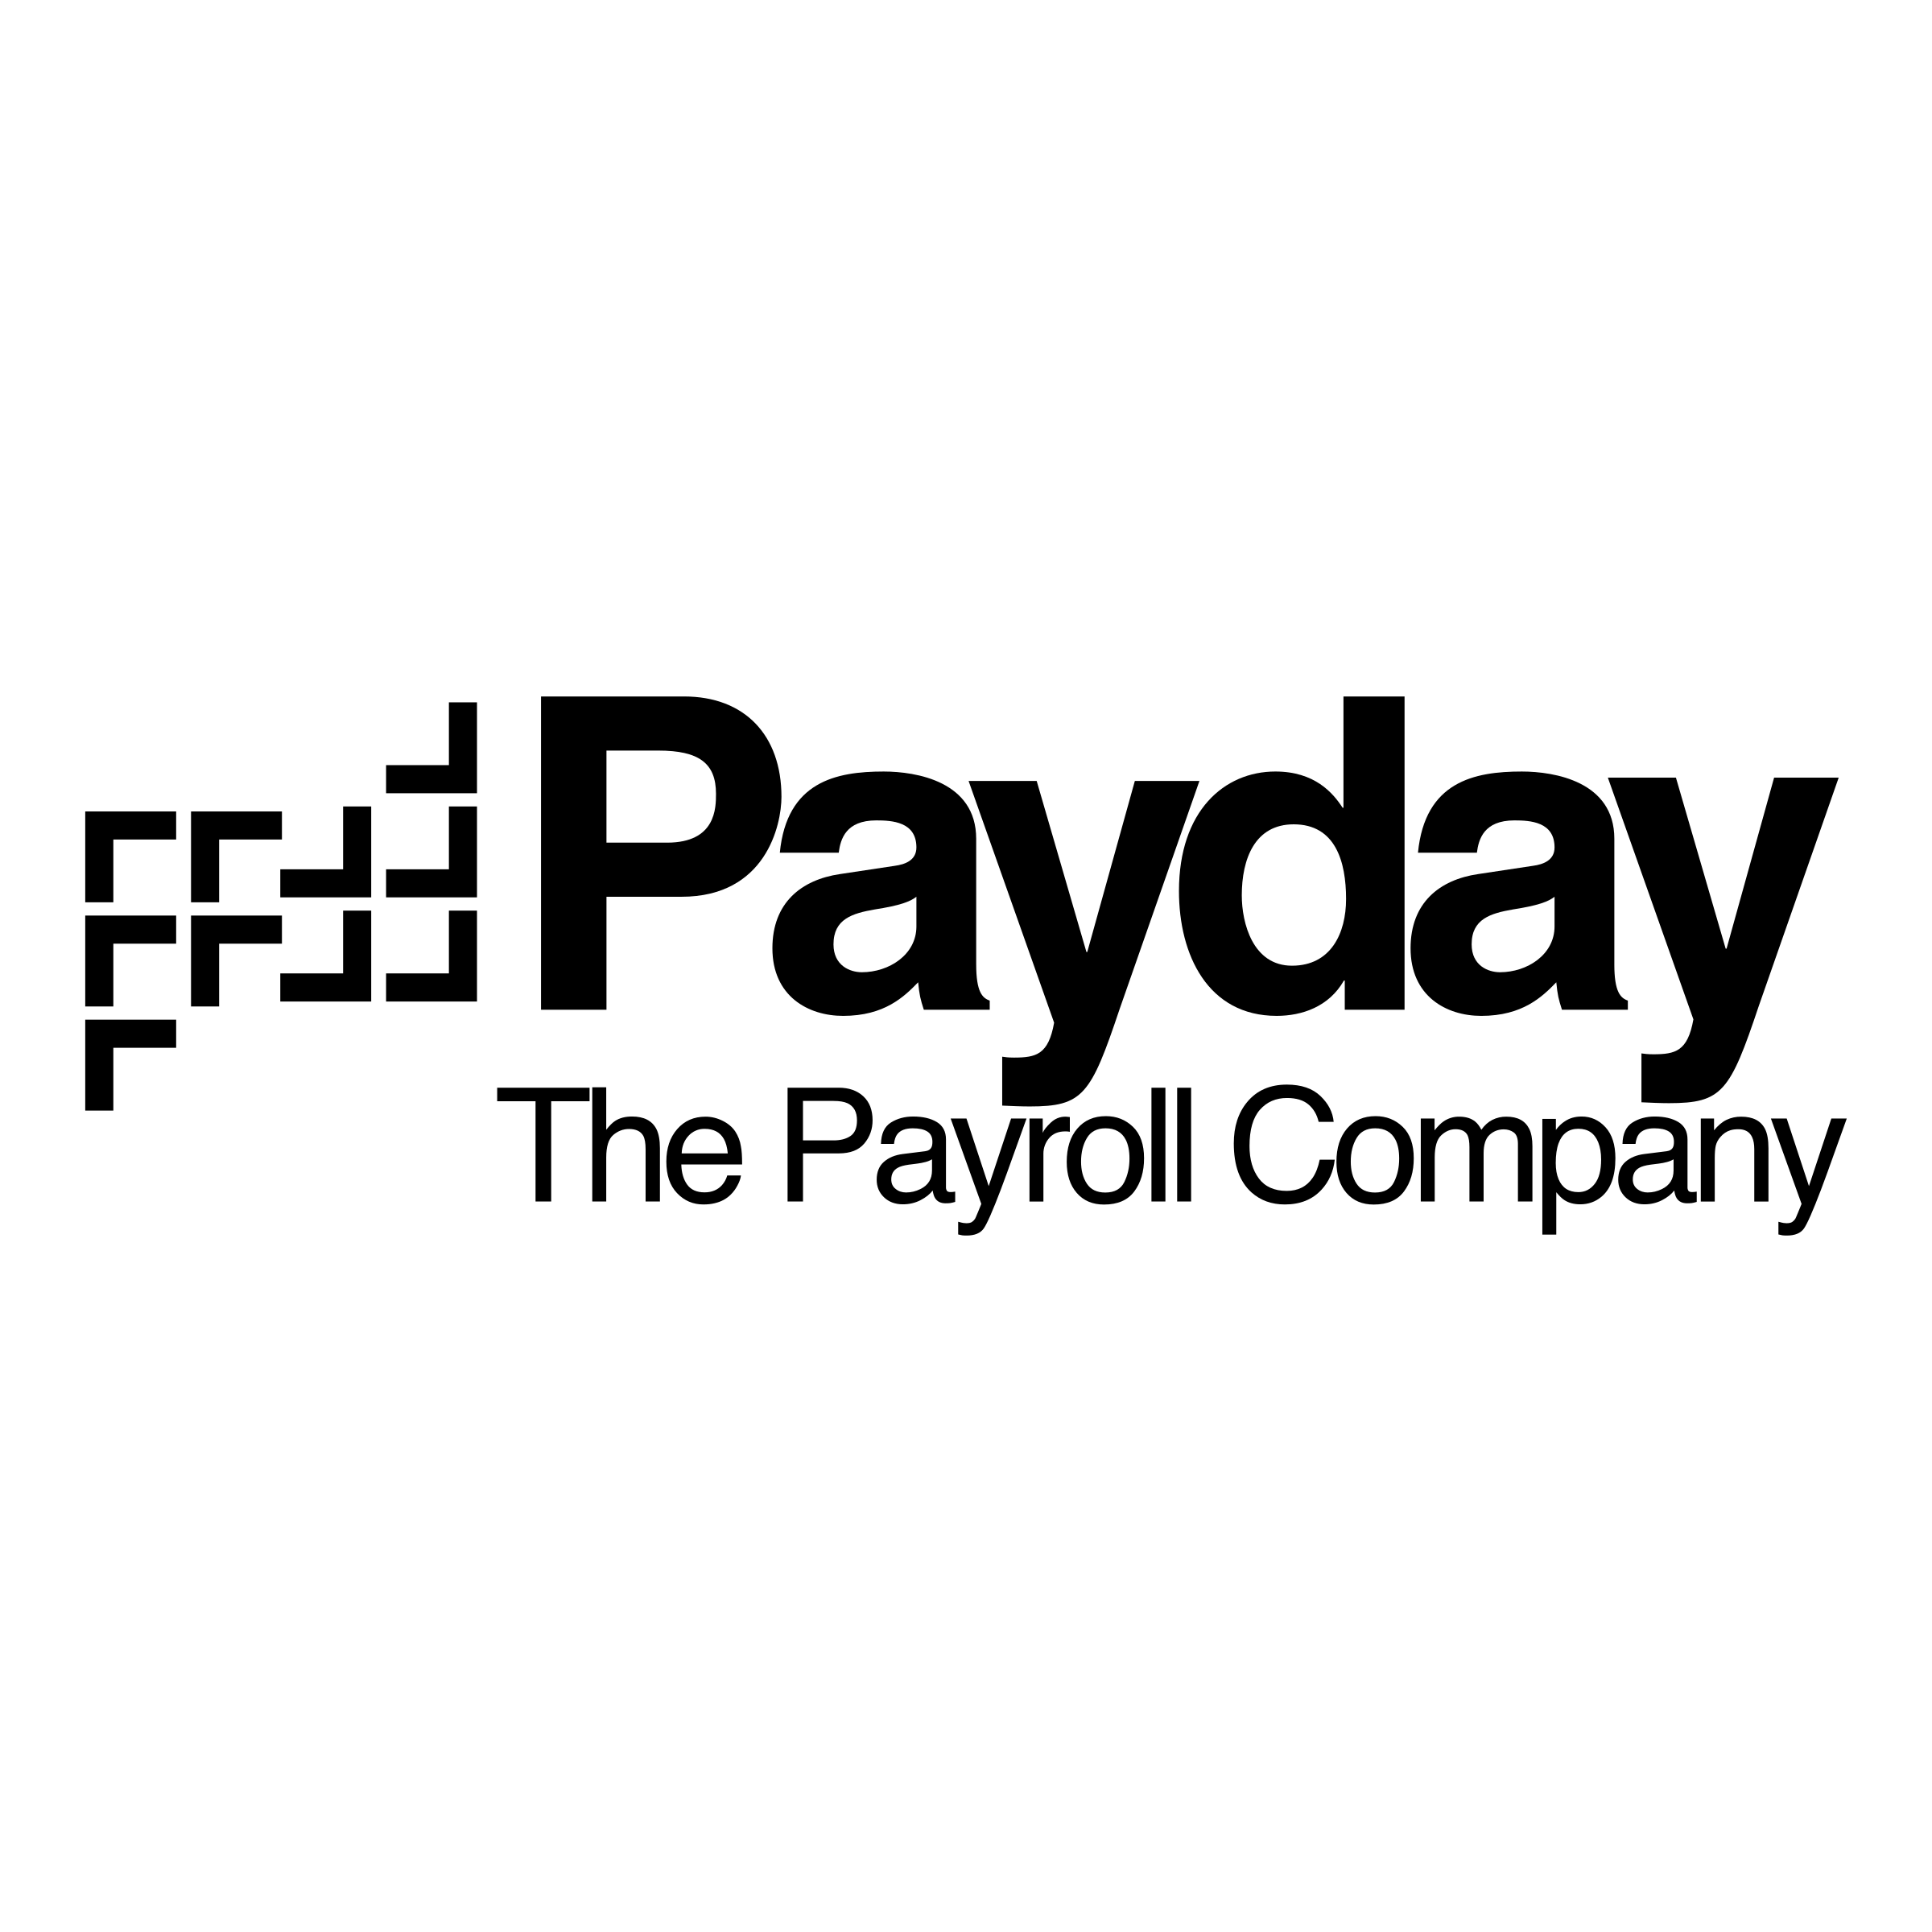 Payday Logo - Payday Logo PNG Transparent & SVG Vector